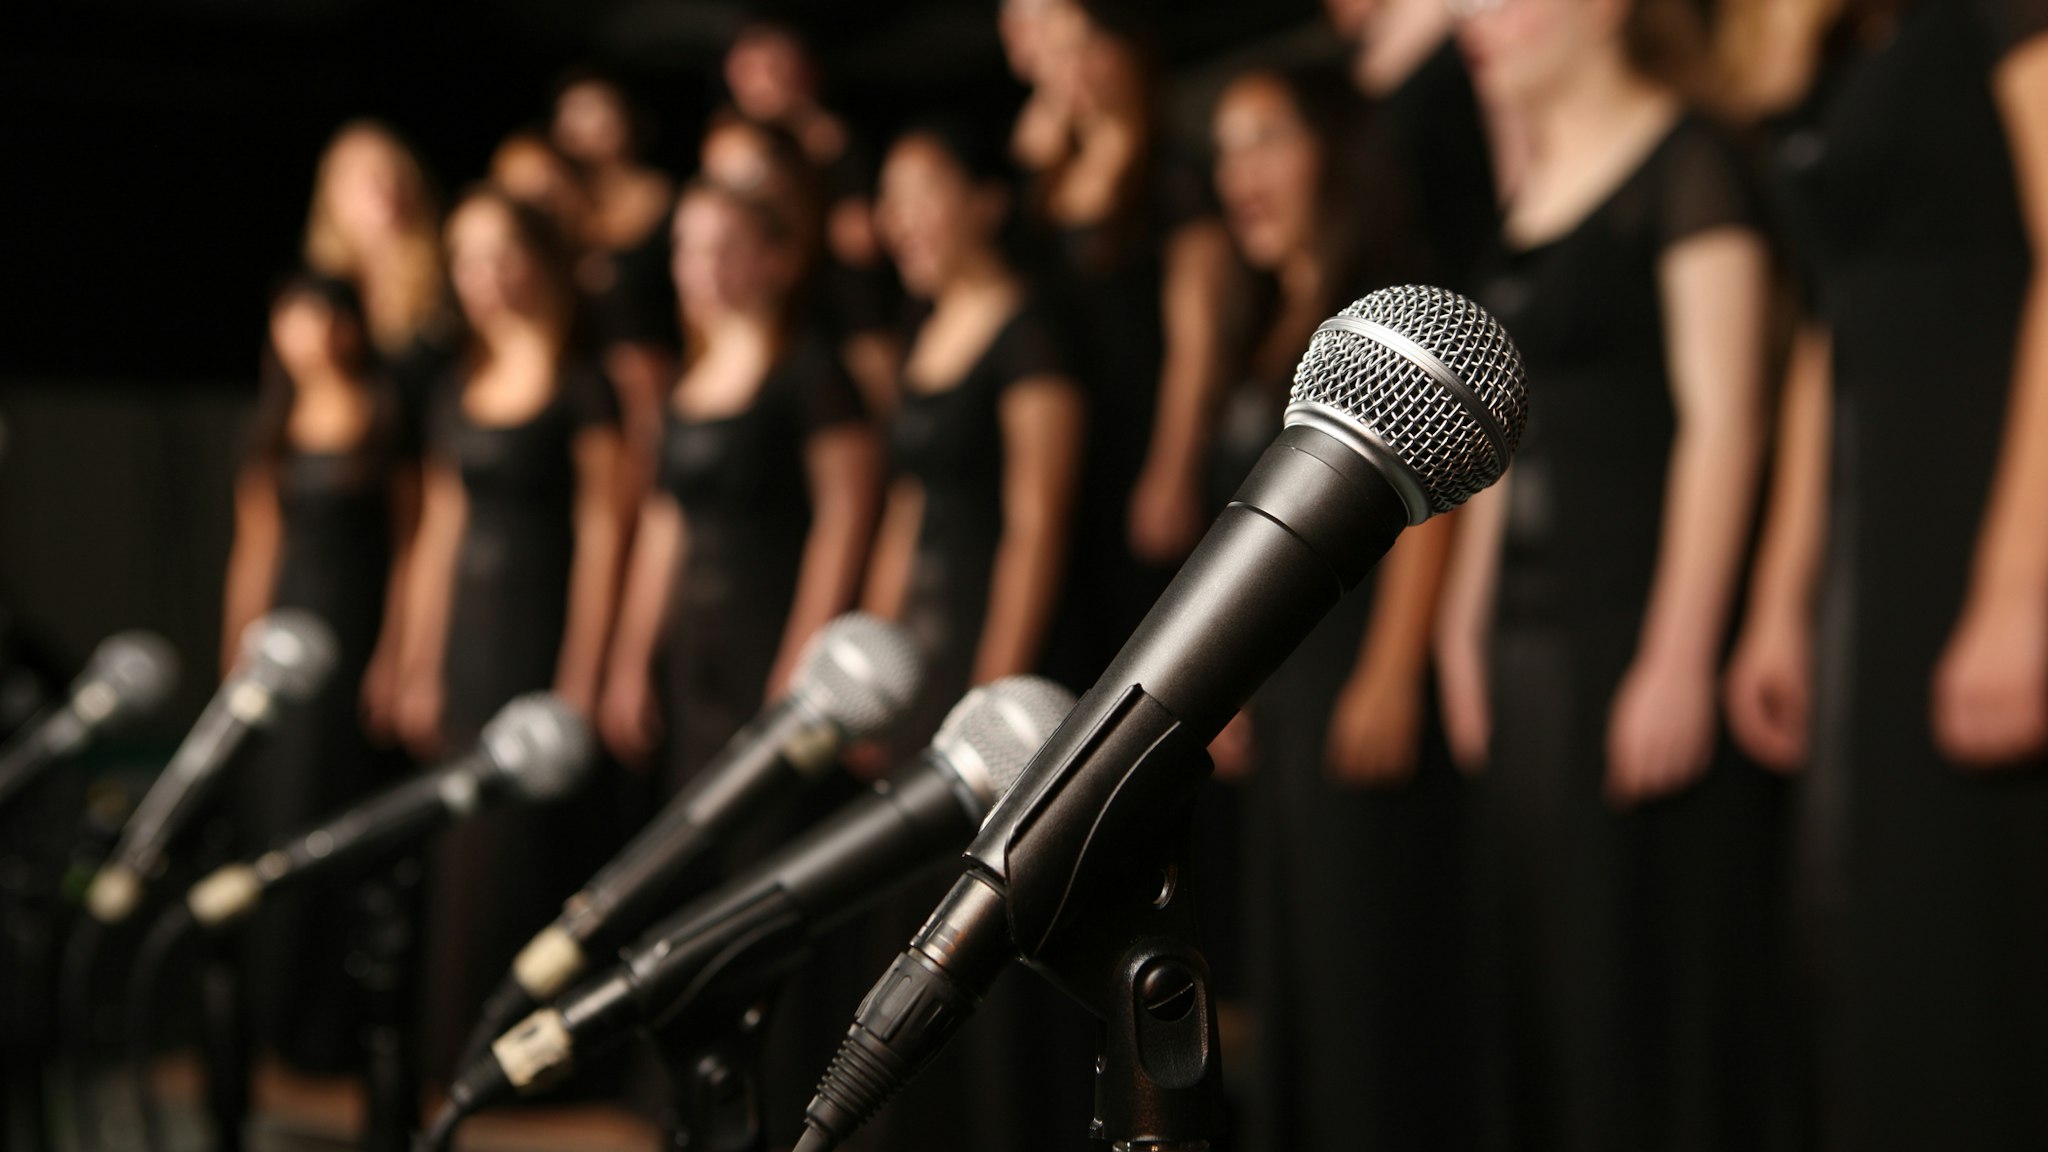 Shot of microphones with choir in the background - stock photo